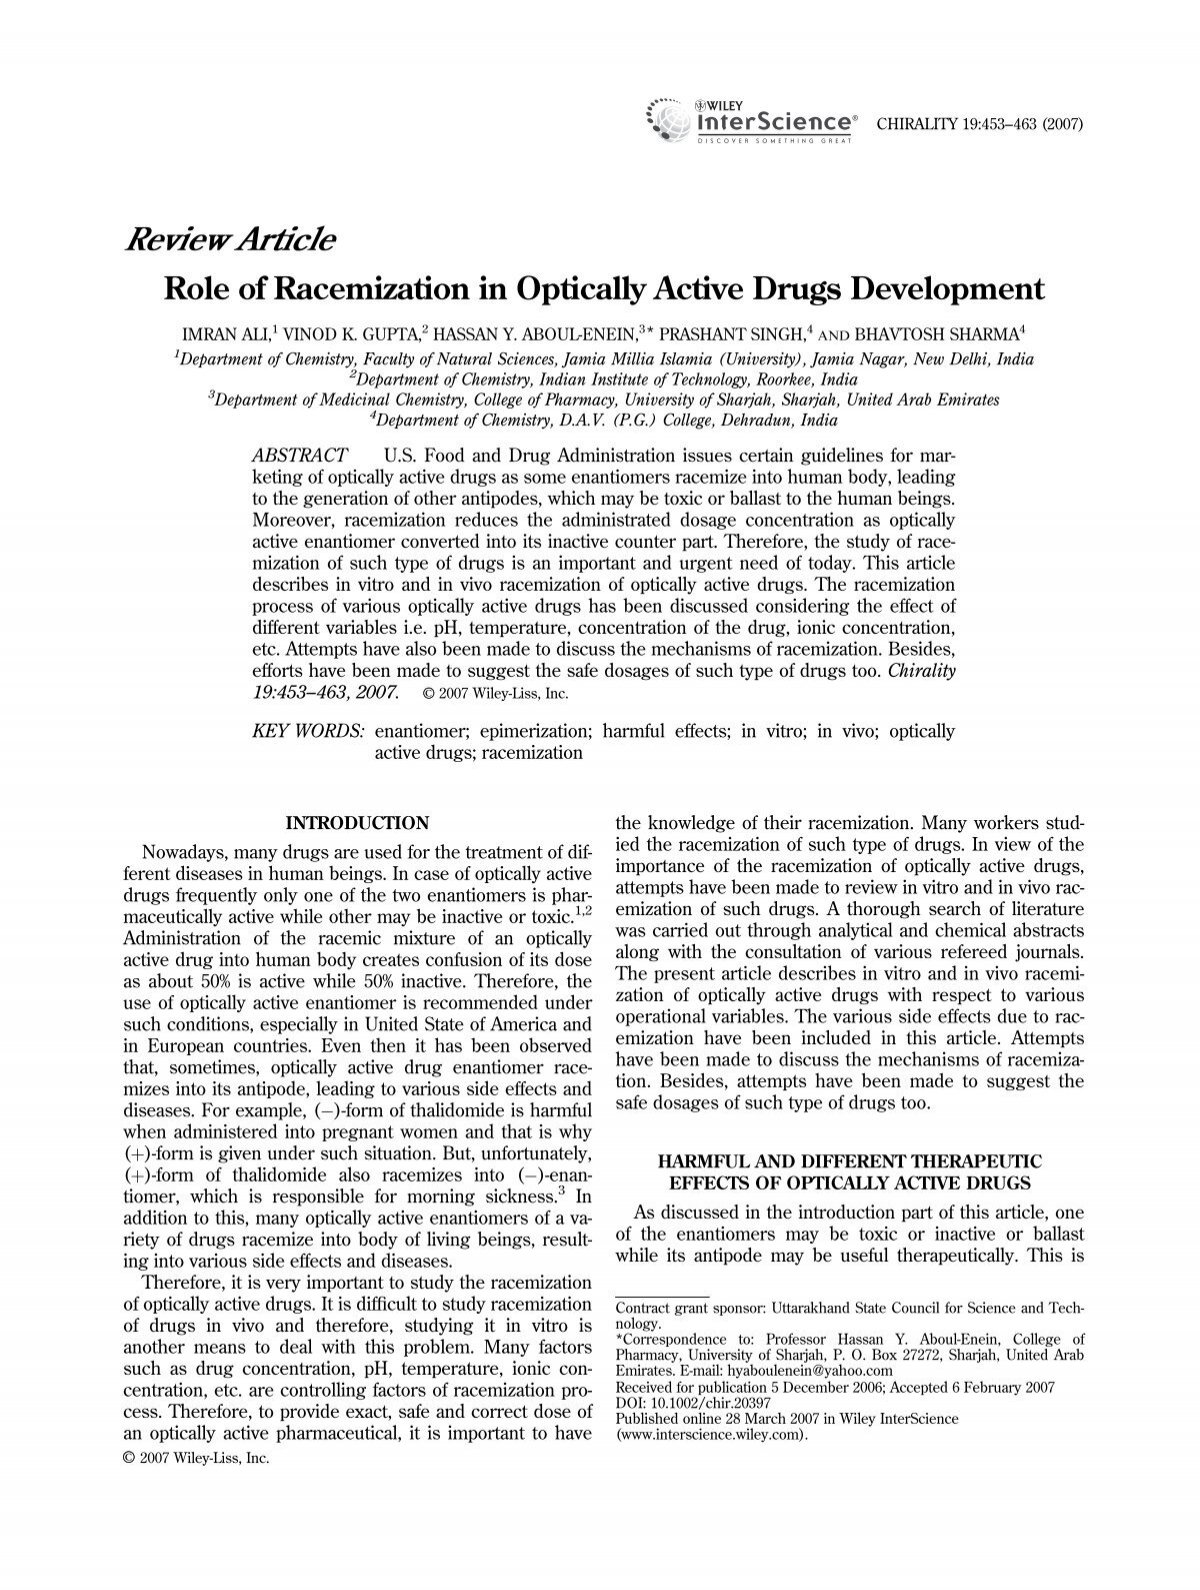 Role Of Racemization In Optically Active Drugs Development